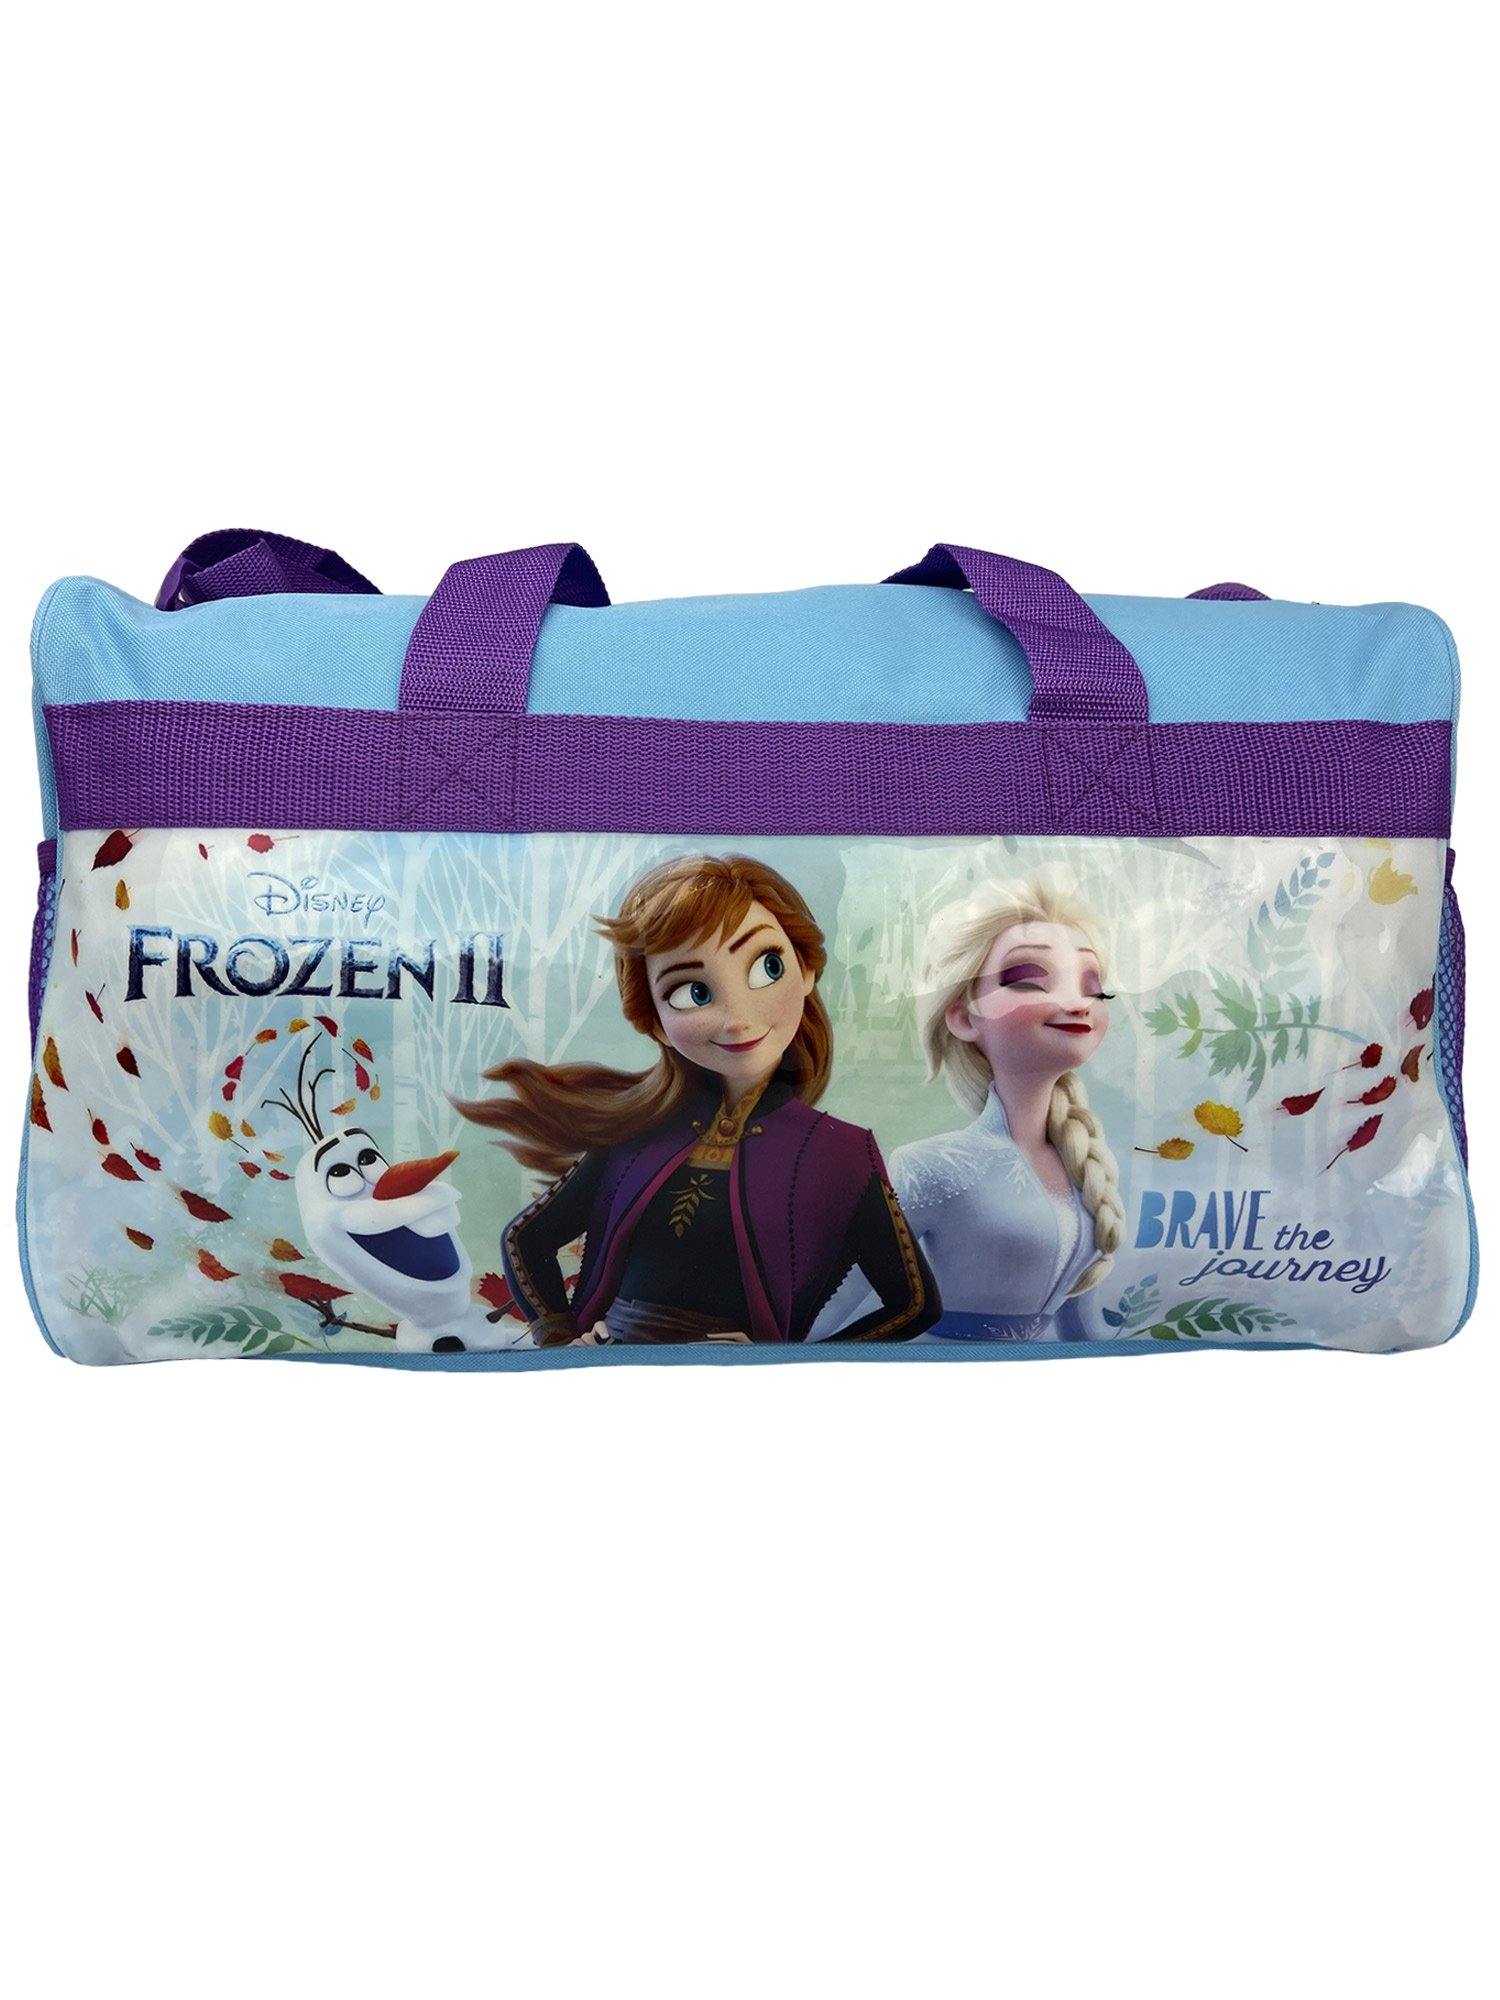 Frozen 2 Anna and Elsa Carry-on "Brave The Journey" Duffel Bag